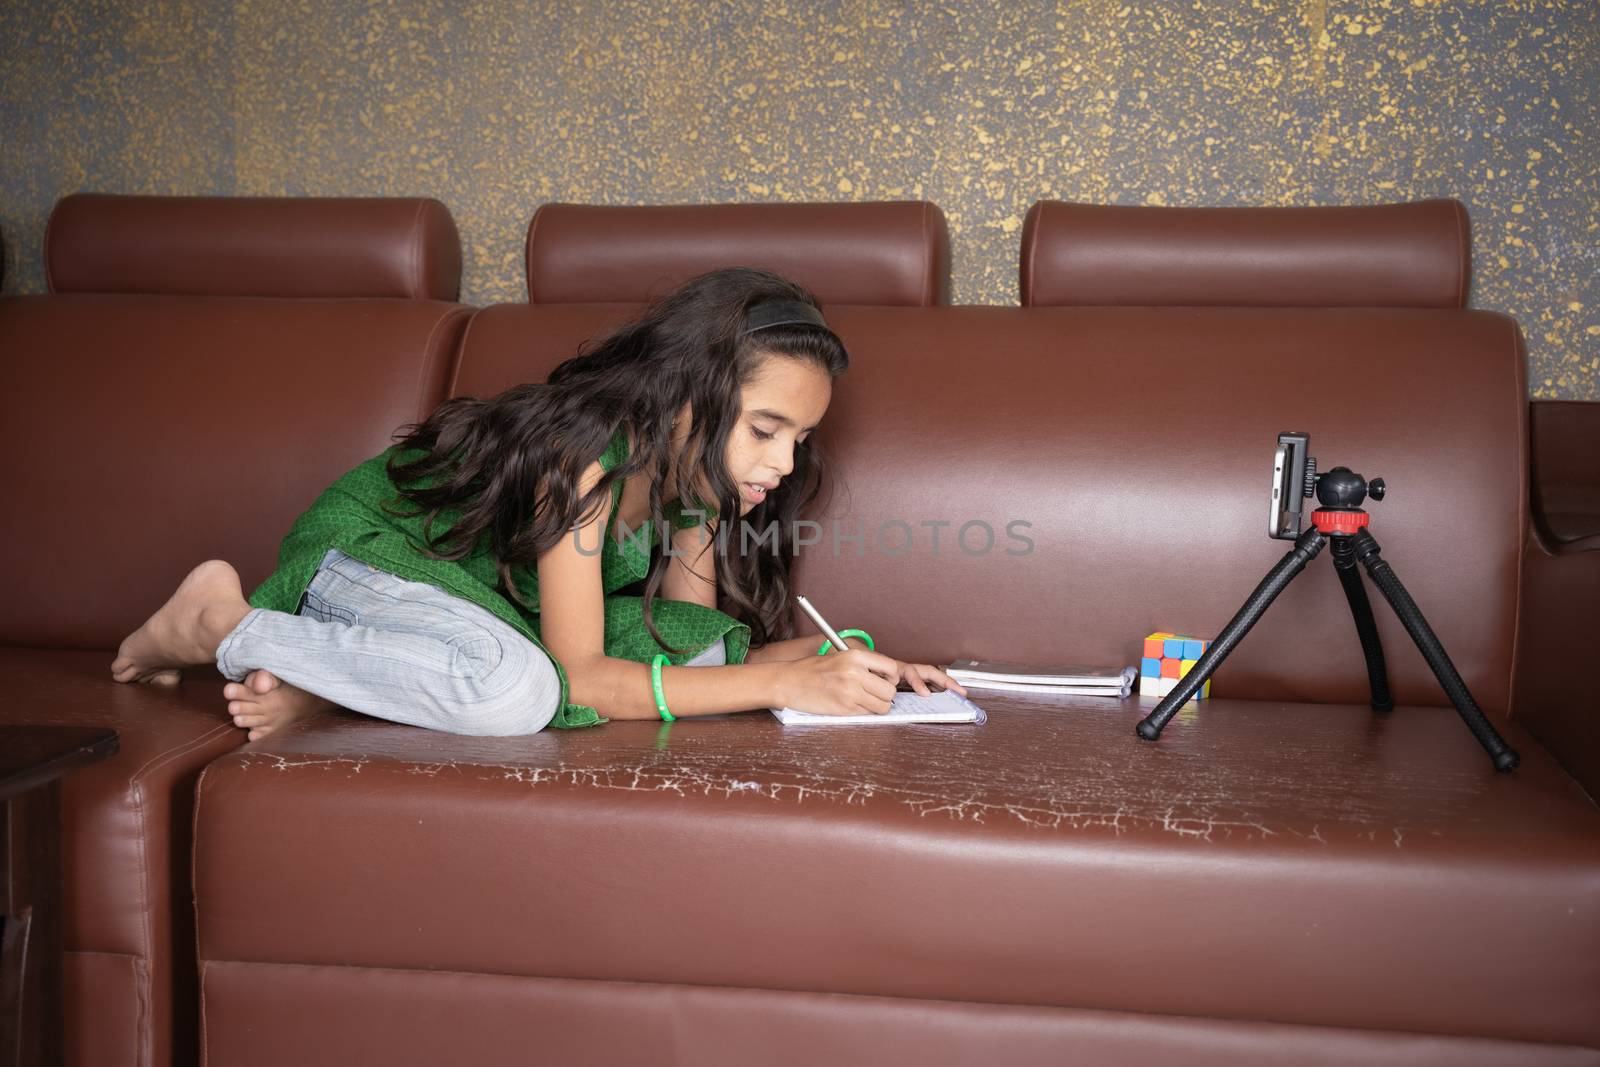 Concept of improper, lazy and way of studying during homeschooling or e-learning and make kids sleepy or boredom, young girl busy in writing by looking into mobile on sofa during covid-19 pandemic by lakshmiprasad.maski@gmai.com